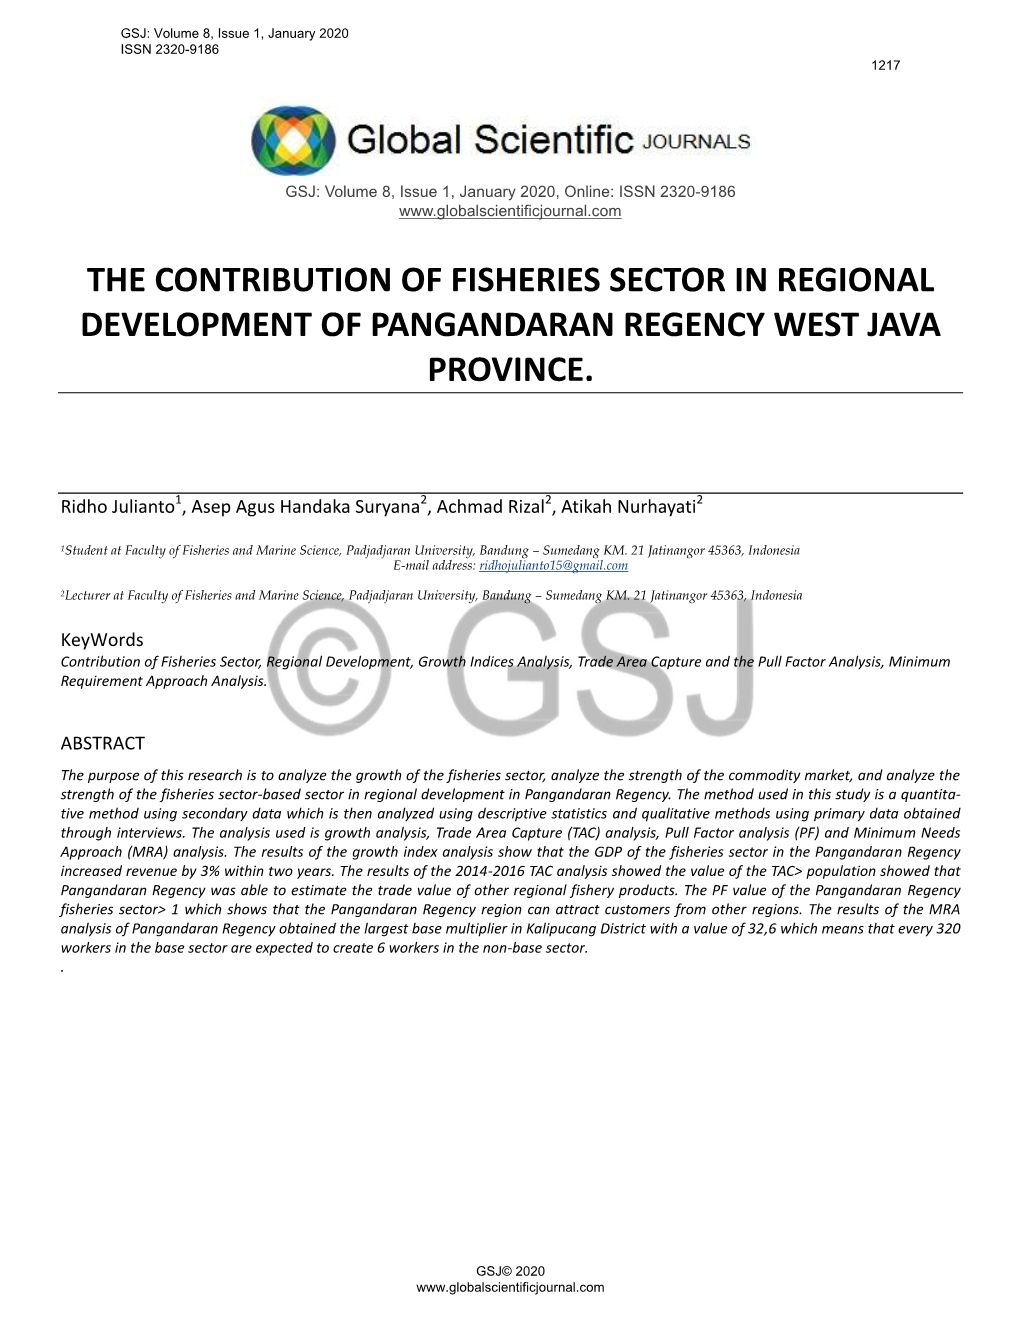 The Contribution of Fisheries Sector in Regional Development of Pangandaran Regency West Java Province